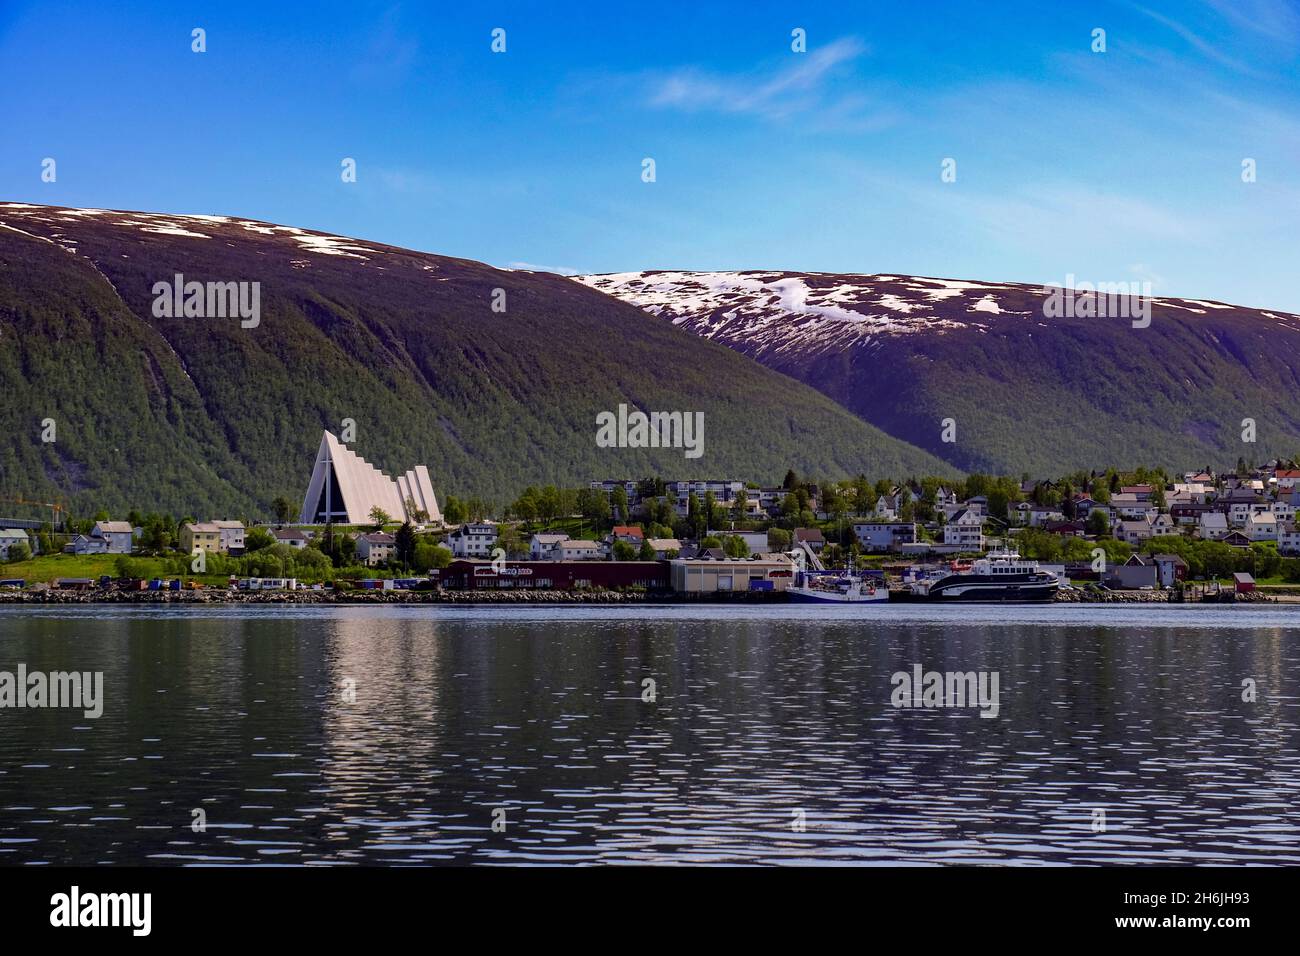 Tromsdalen Church (The Arctic Cathedral) seen in the distance, Tromso, Norway, Scandinavia, Europe Stock Photo